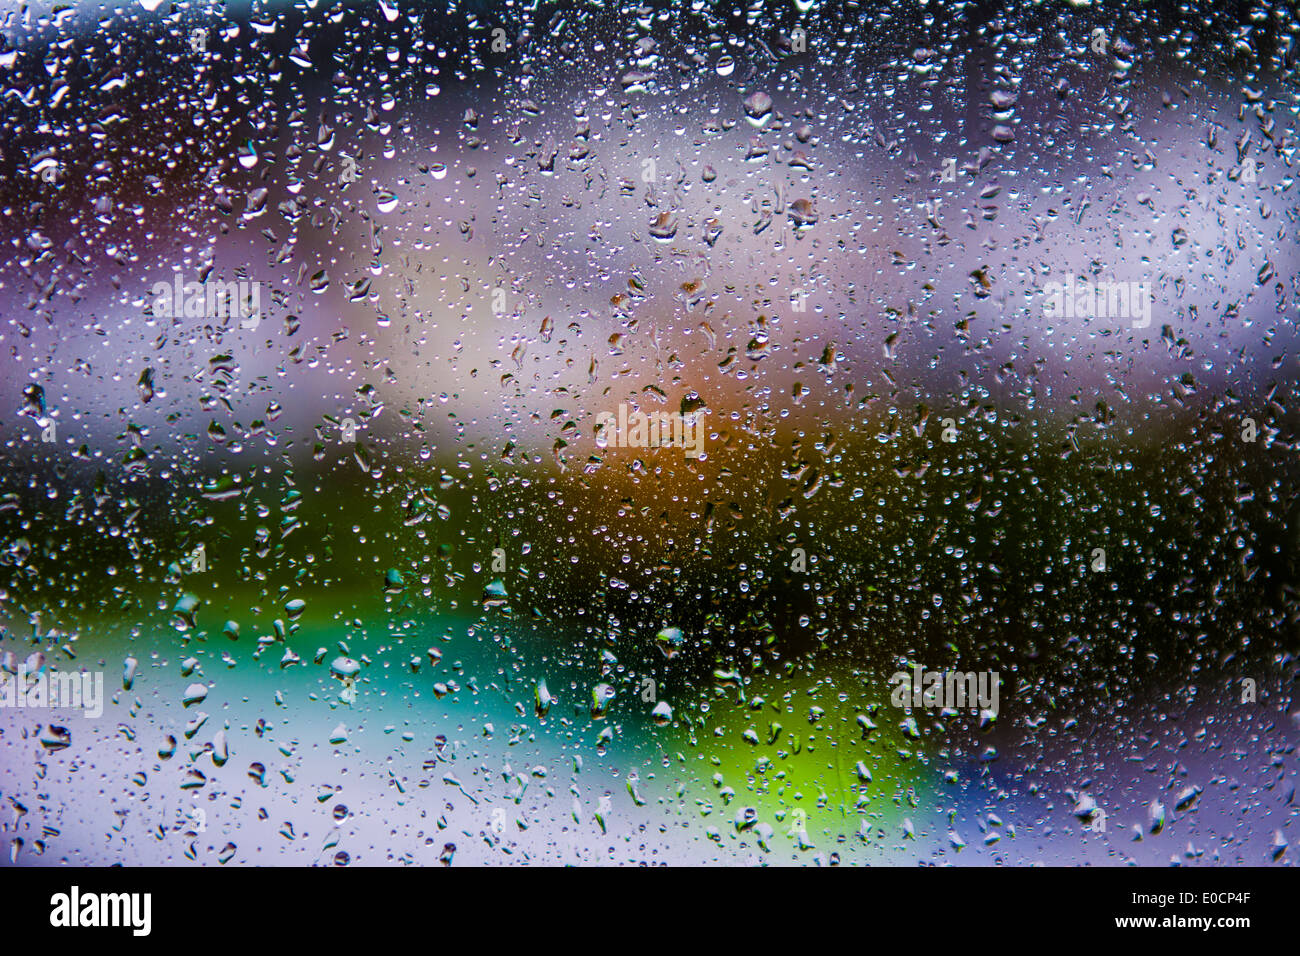 Rainwater droplets on a glass window pain with the background out of focus. Stock Photo